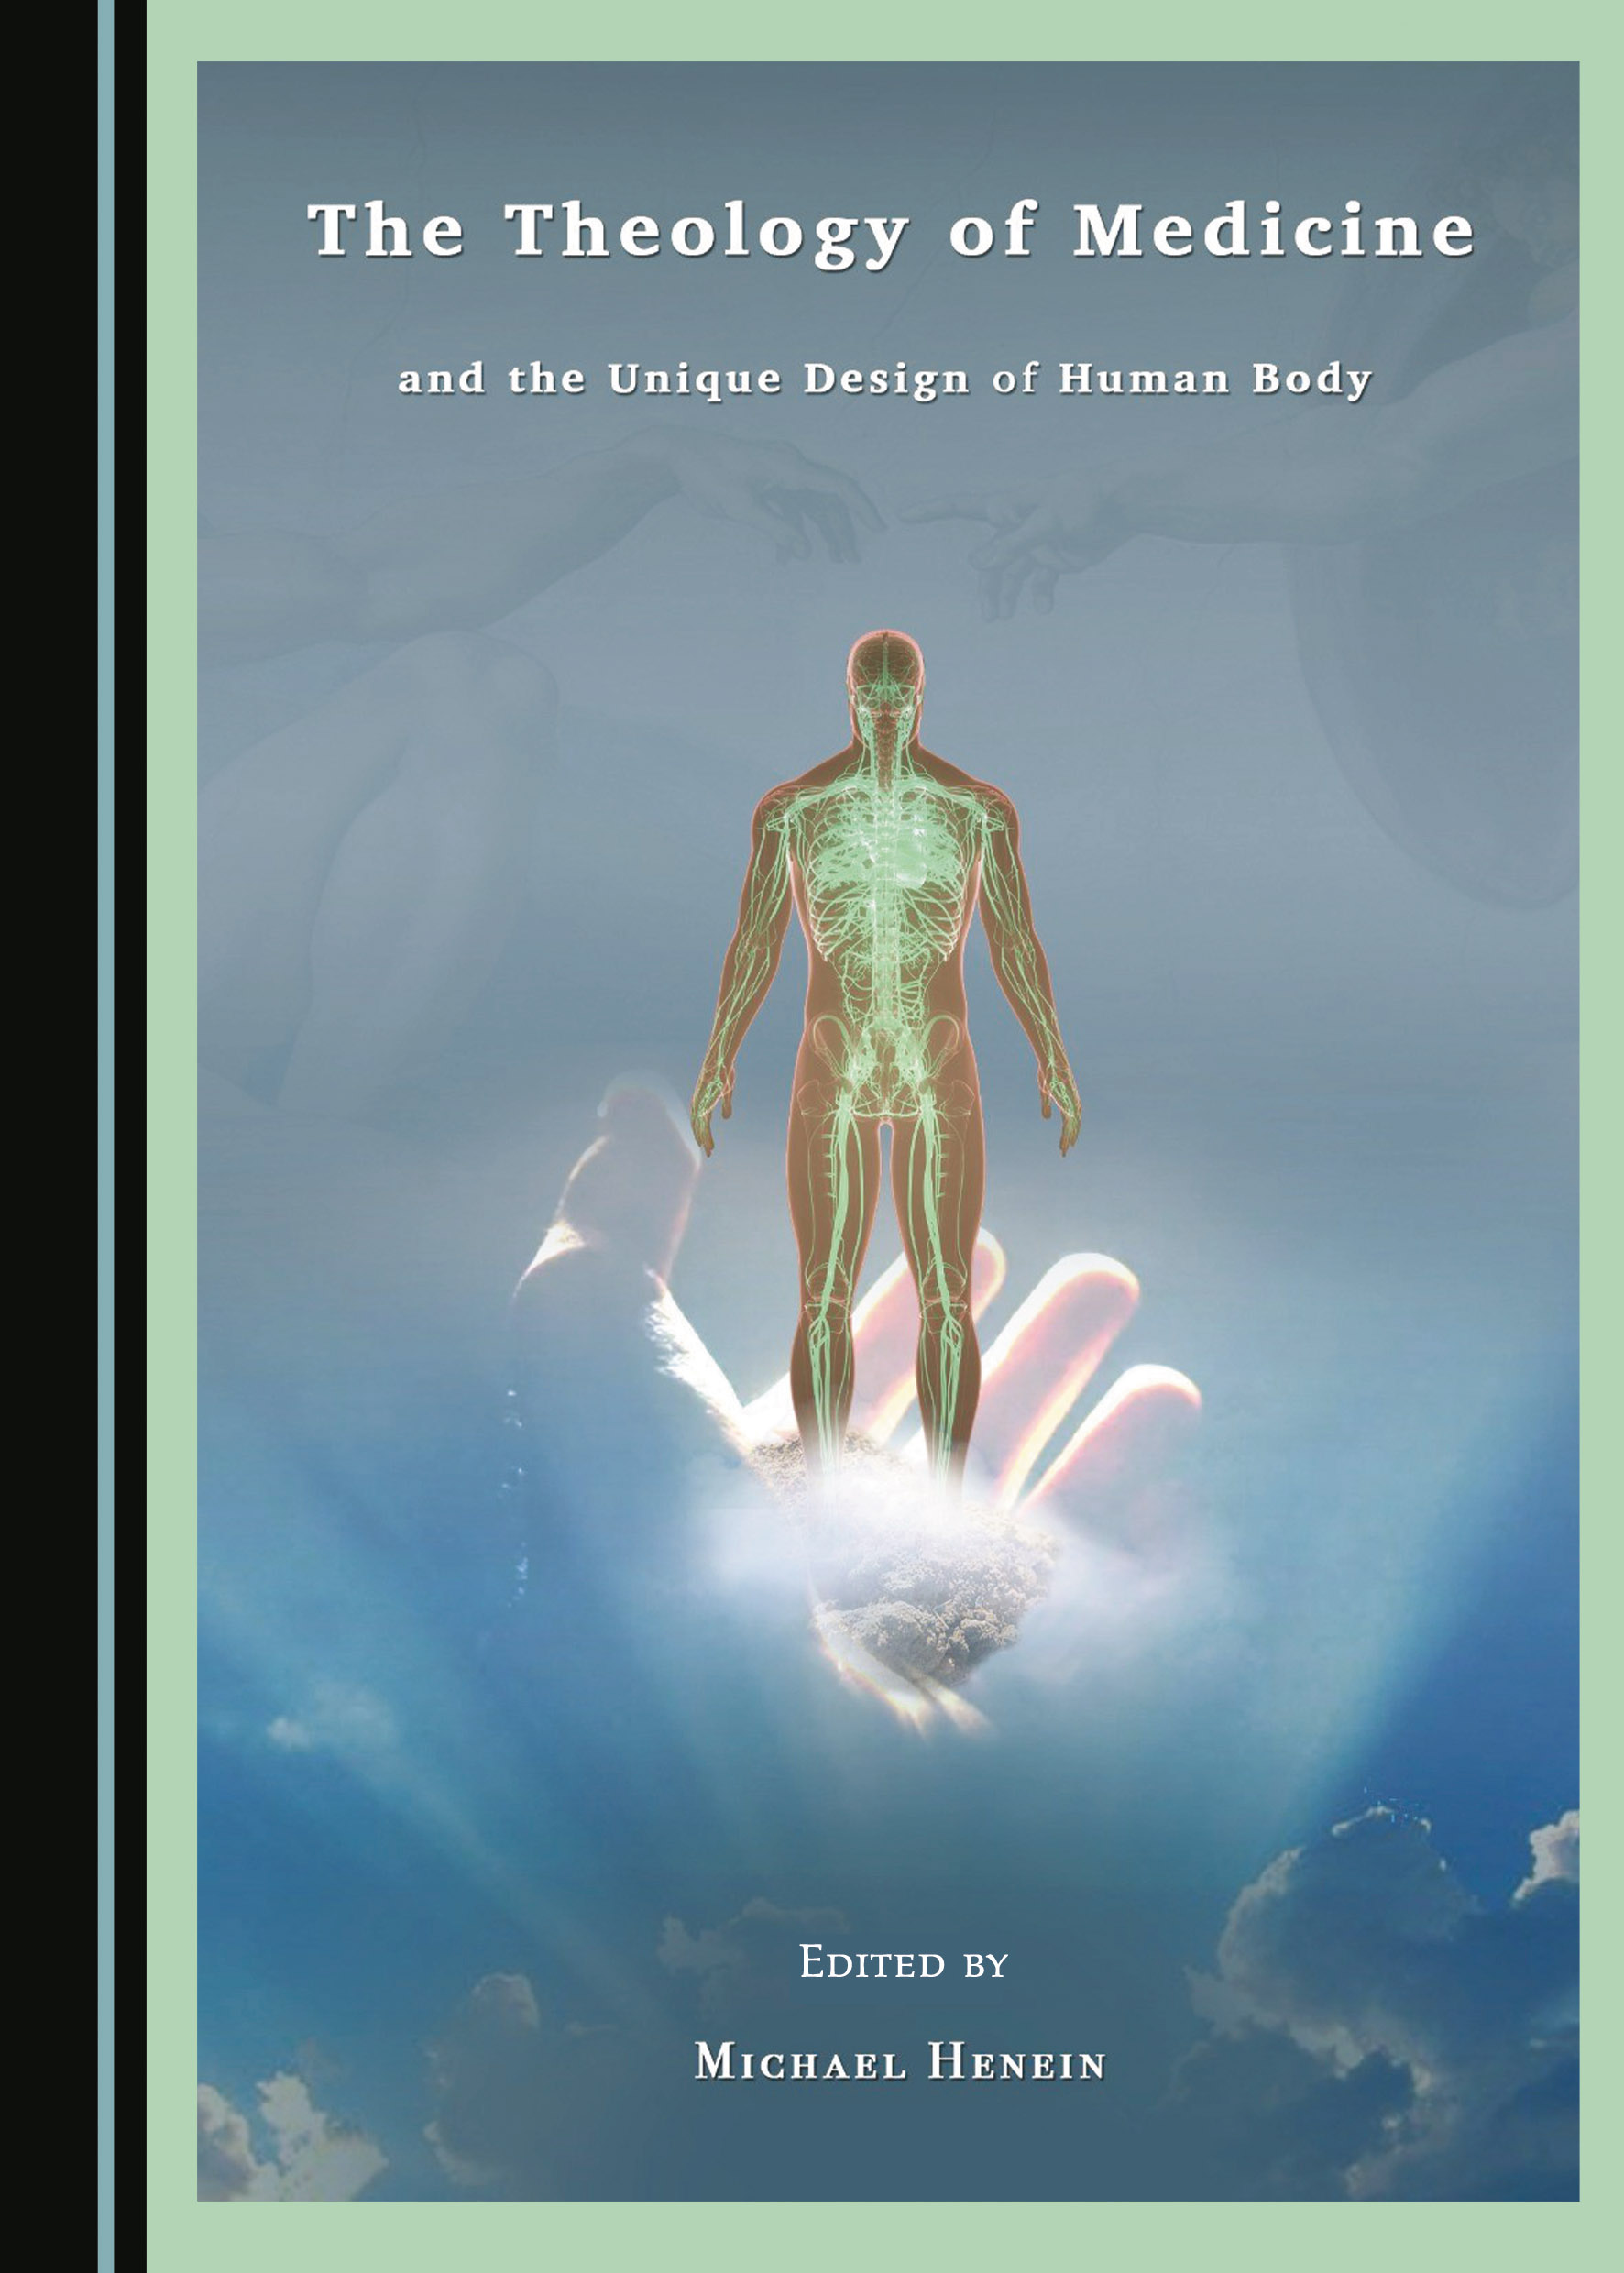 The Theology of Medicine and the Unique Design of the Human Body